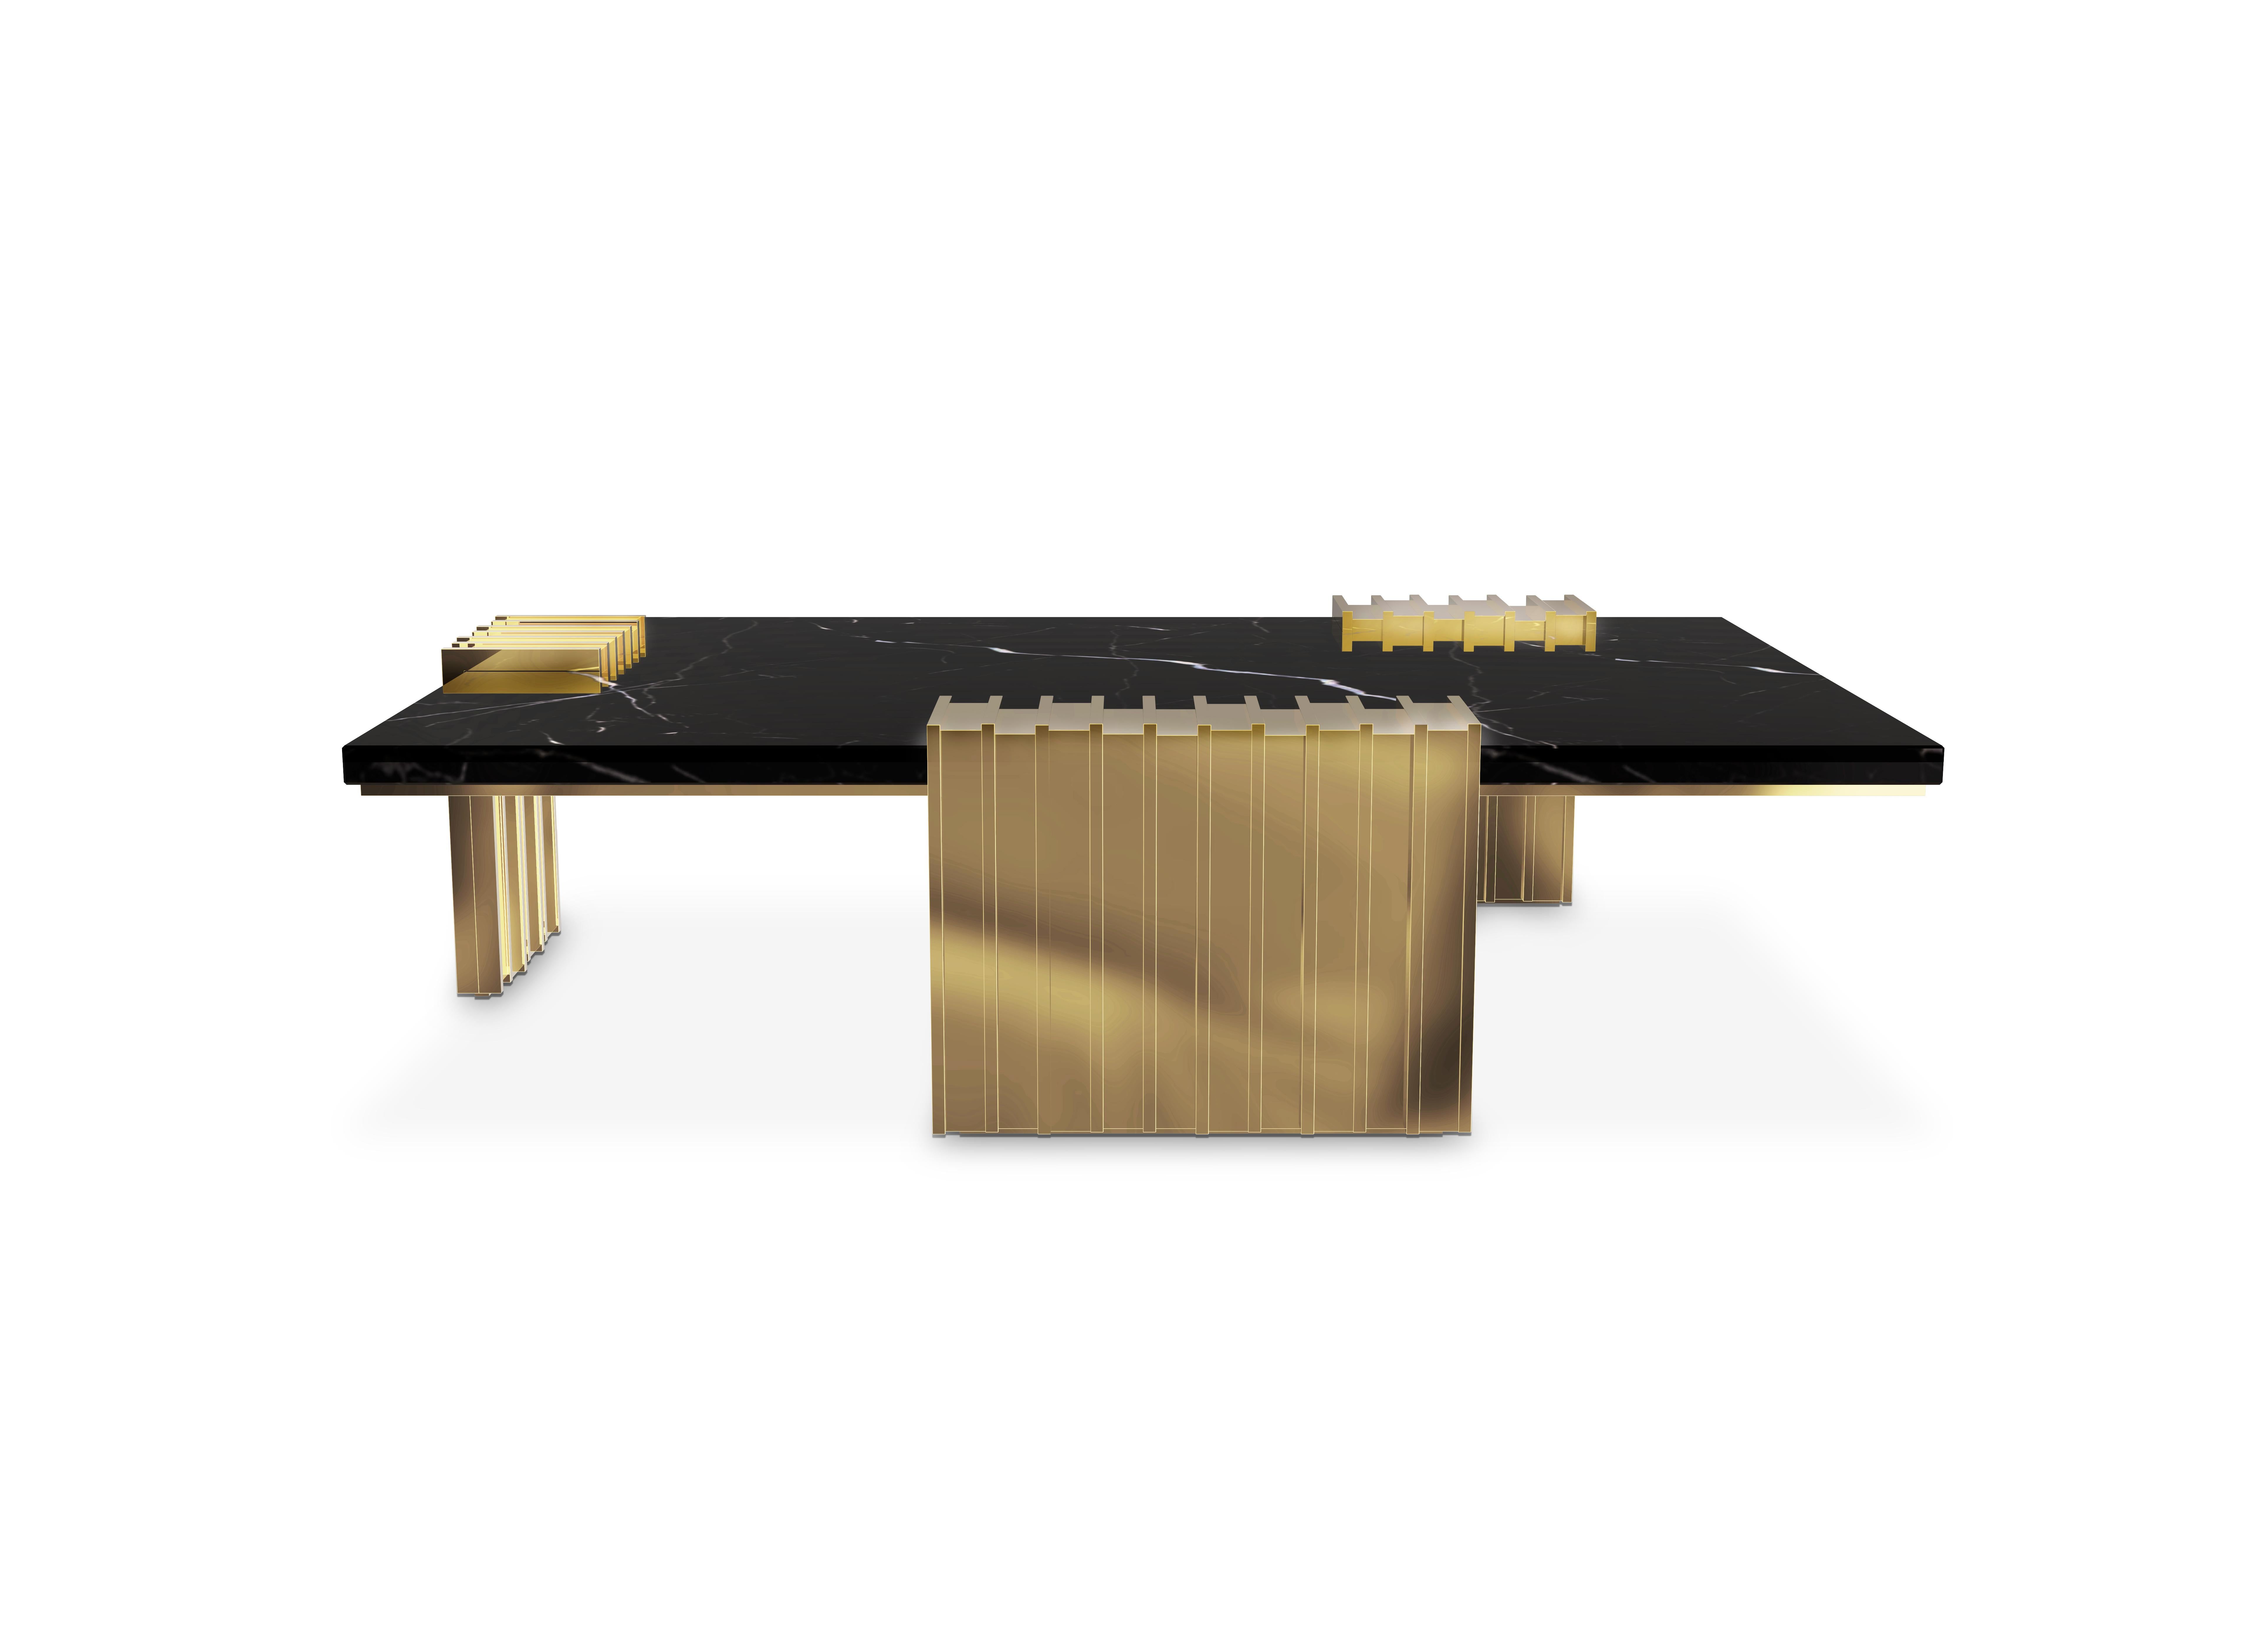 Vertigo center table was made with a sleek design giving a classy feel and a luxurious appeal. The unusual forms in gold plated brass involve the Nero Marquina marble making the center of living rooms the aura of your projects.
Materials: Nero